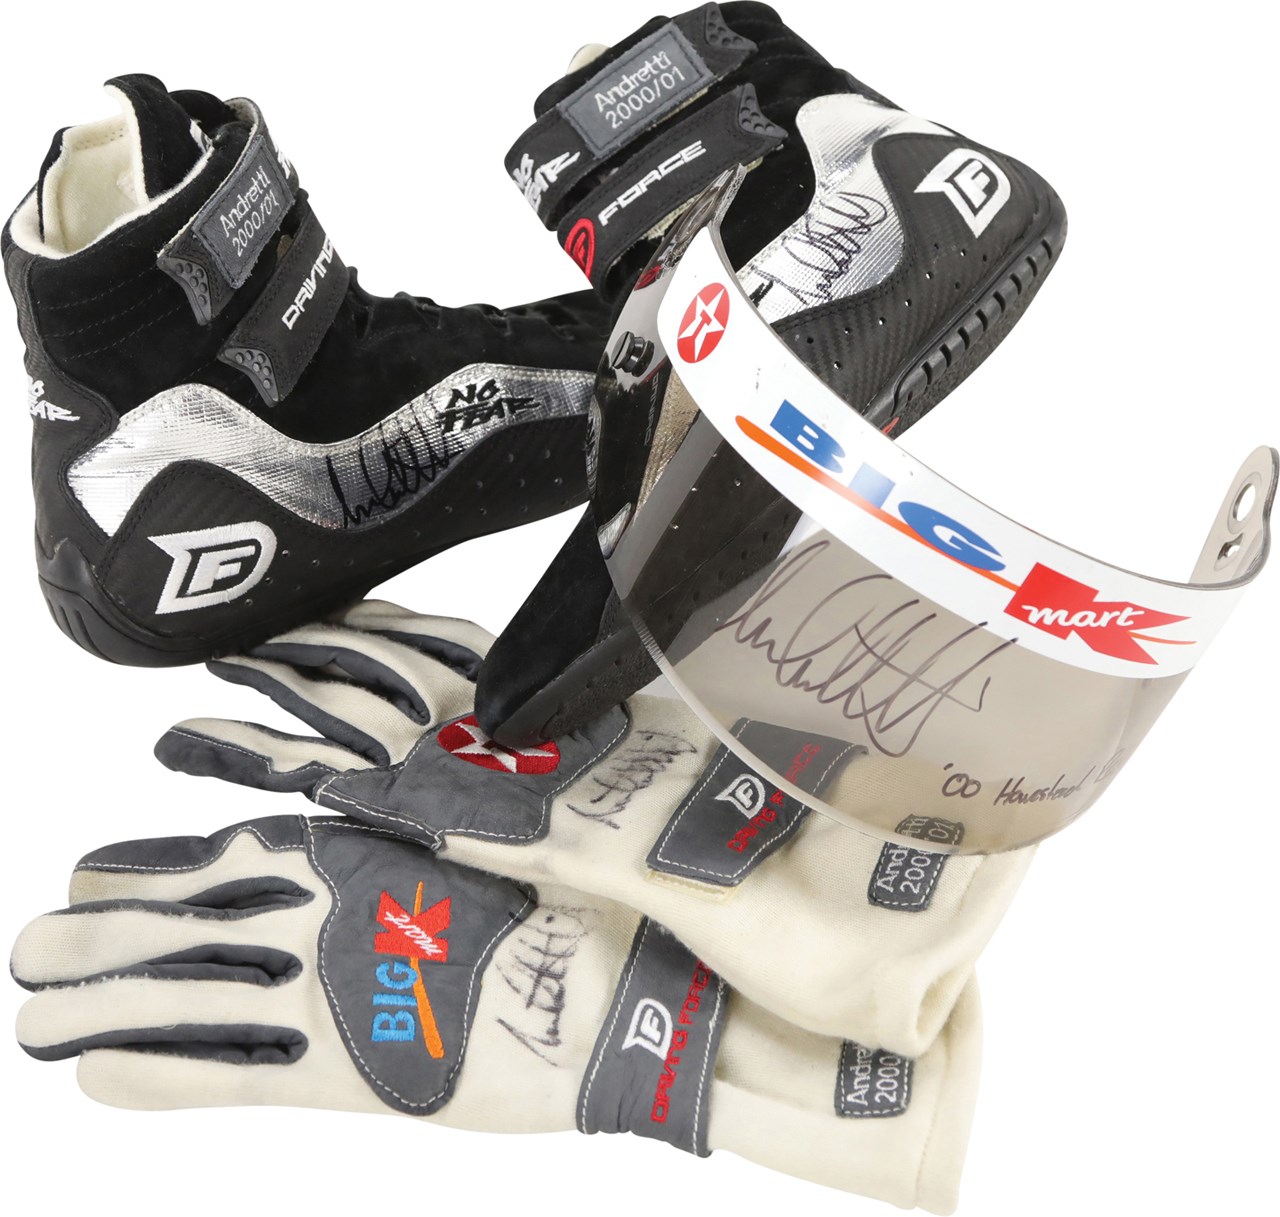 Olympics and All Sports - 2000 Michael Andretti Race Used Gloves, Shoes, and Visor